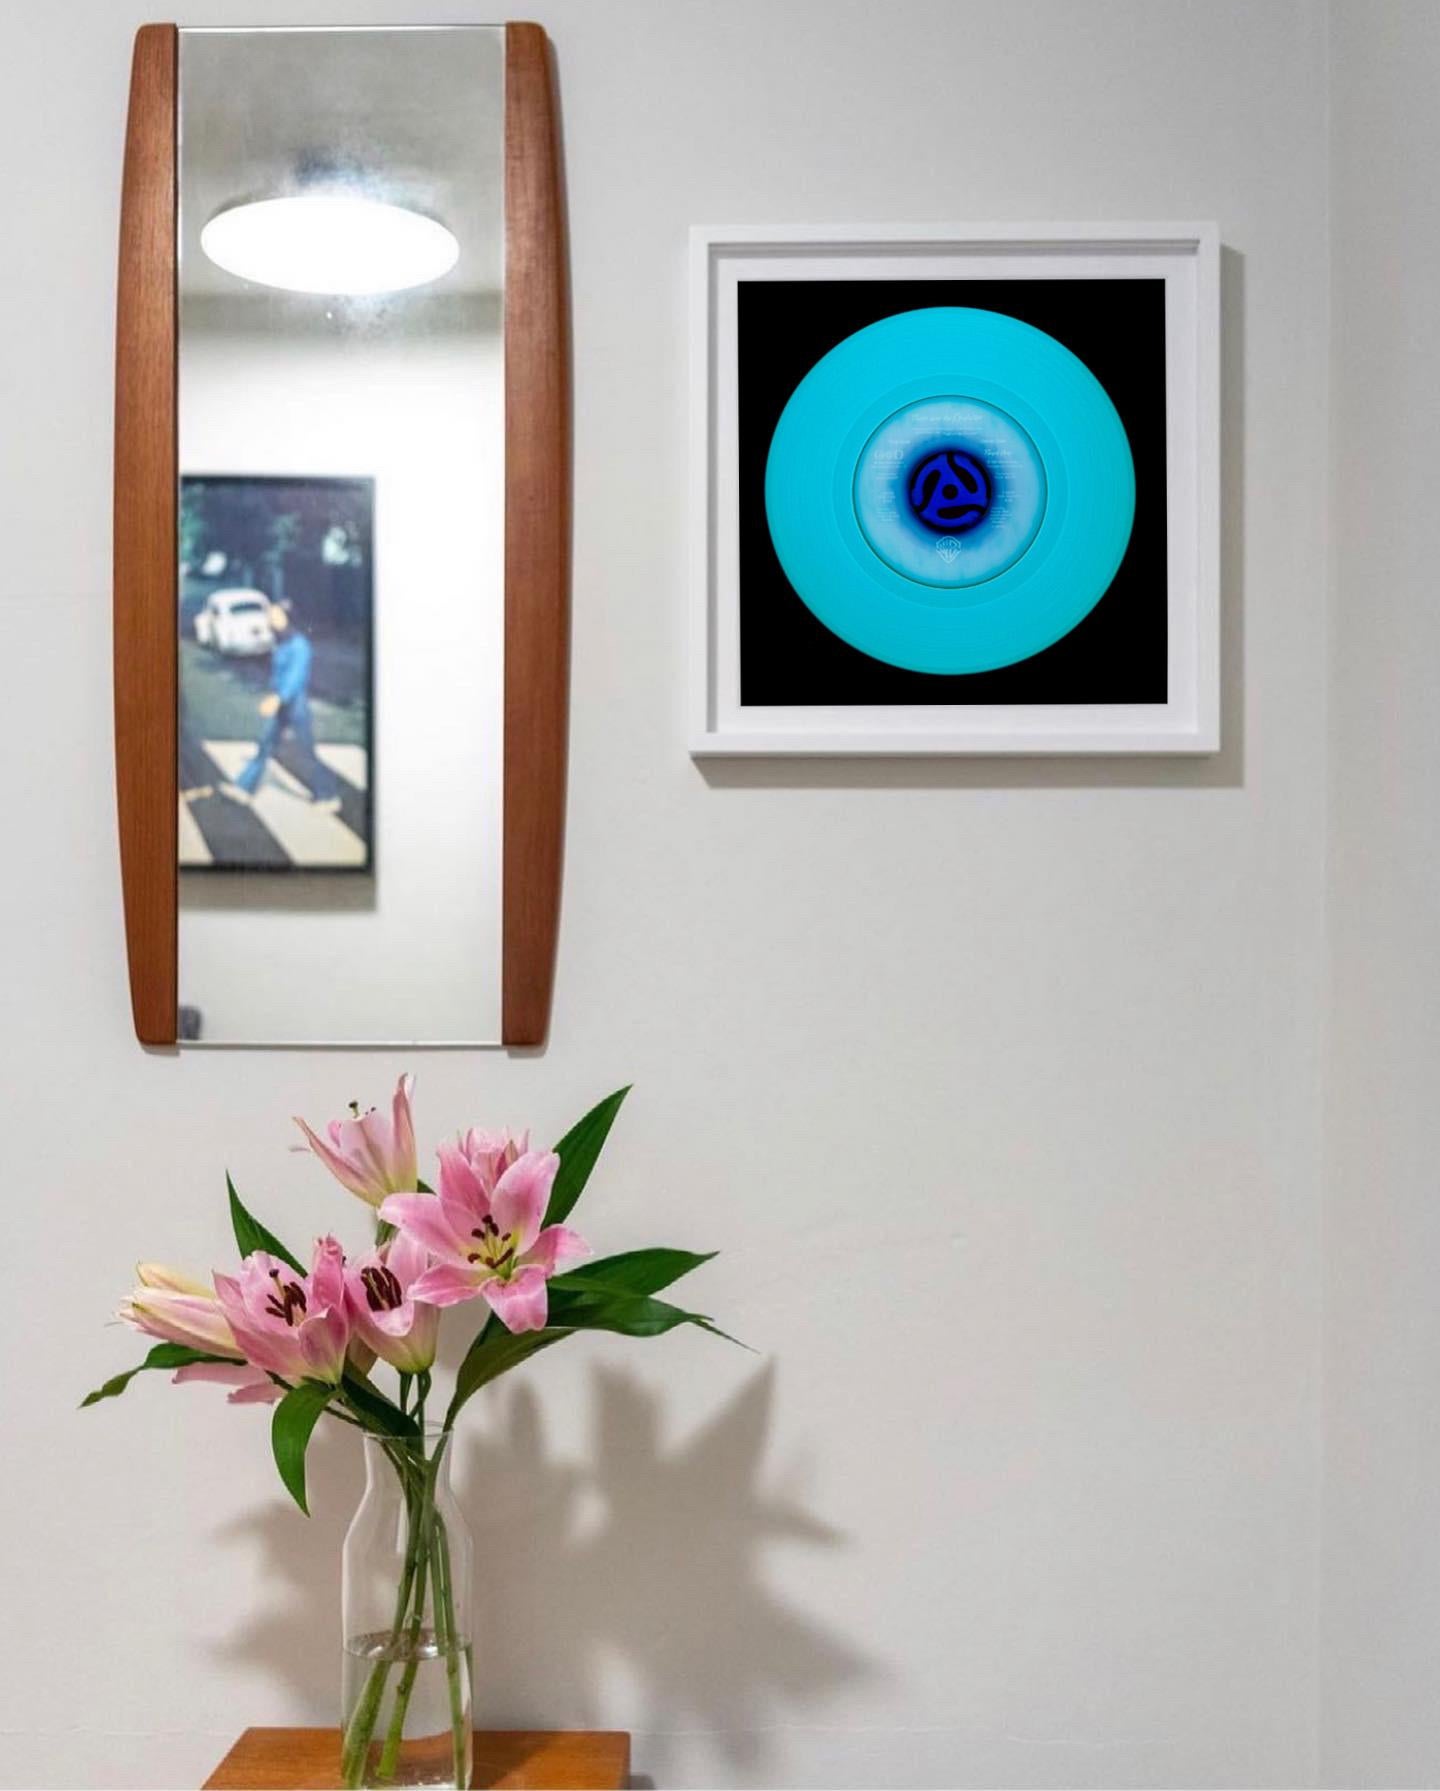 'Other Side (Blue)' from the Heidler & Heeps Vinyl Collection.
Acclaimed contemporary photographers, Richard Heeps and Natasha Heidler have collaborated to make this beautifully mesmerising collection. A celebration of the vinyl record and analogue